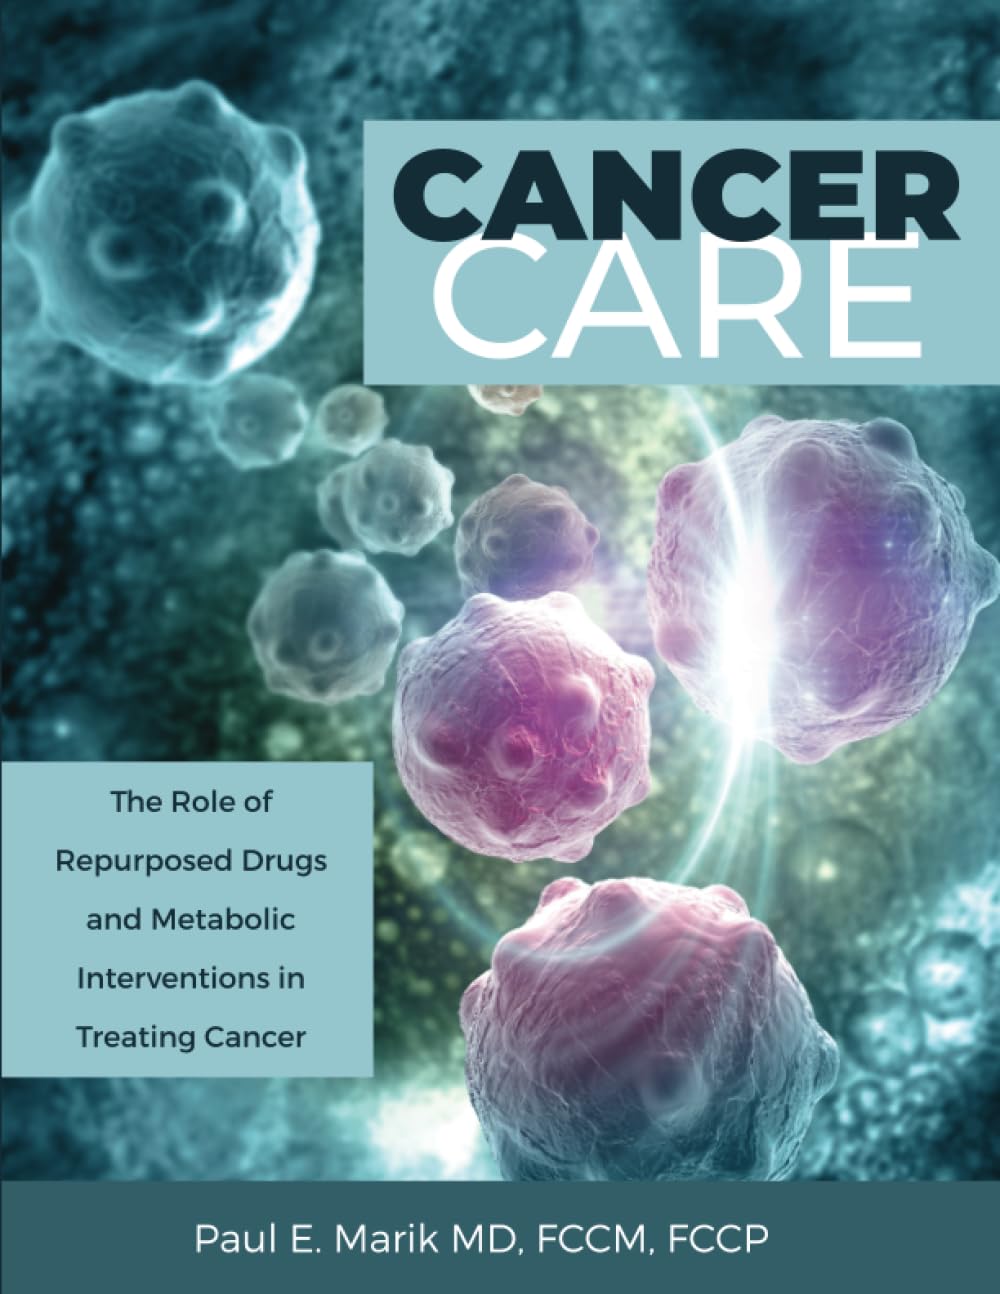 Cancer Care: The Role of Repurposed Drugs and Metabolic Interventions in Treating Cancer